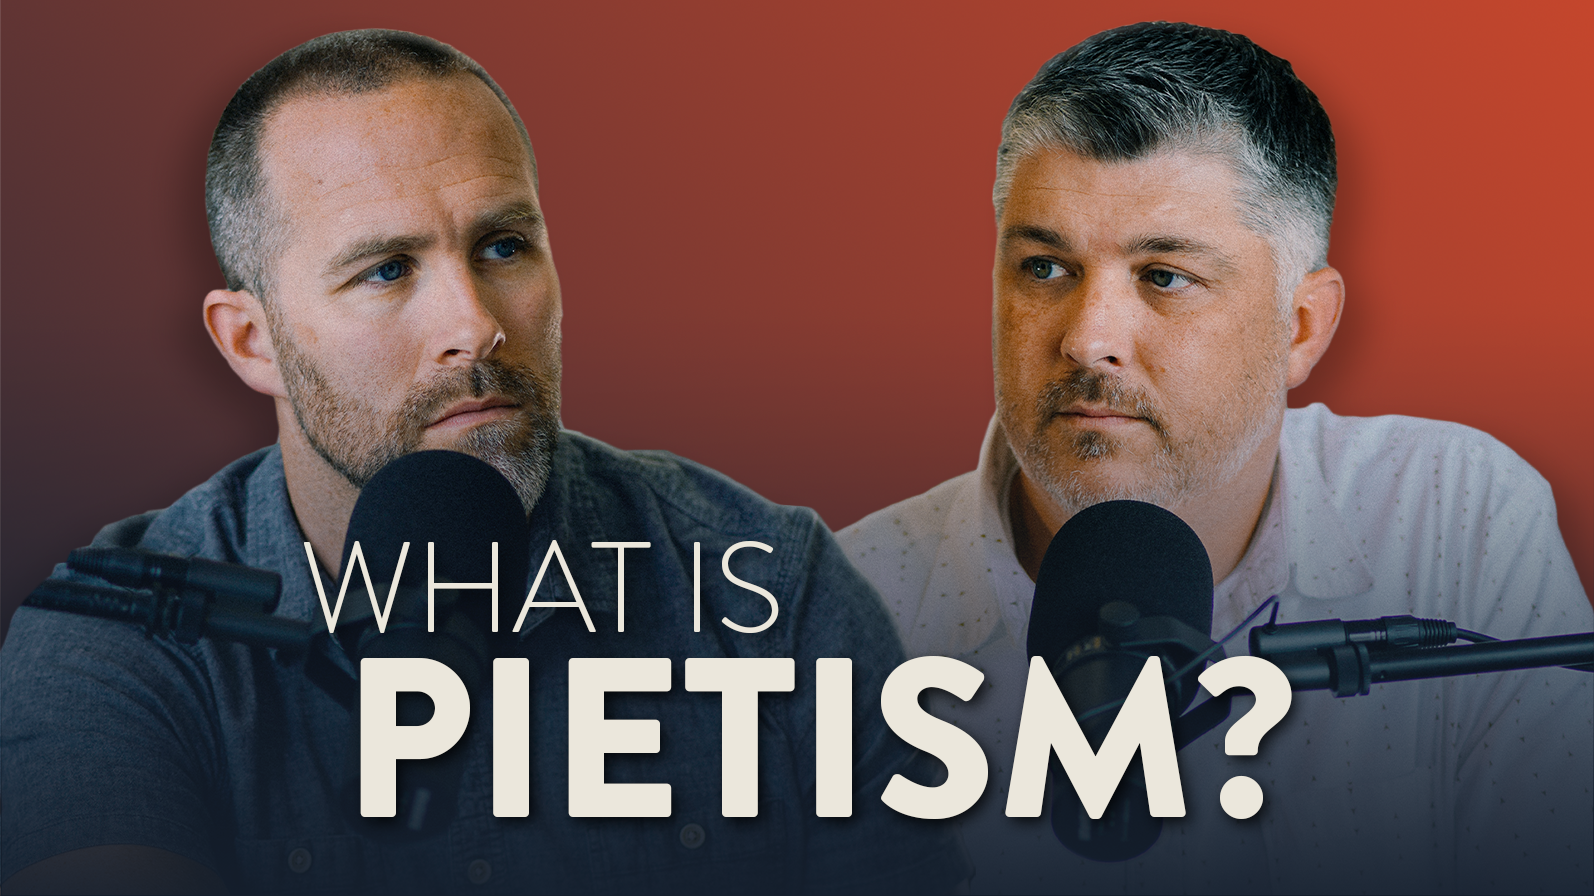 What Is Pietism?